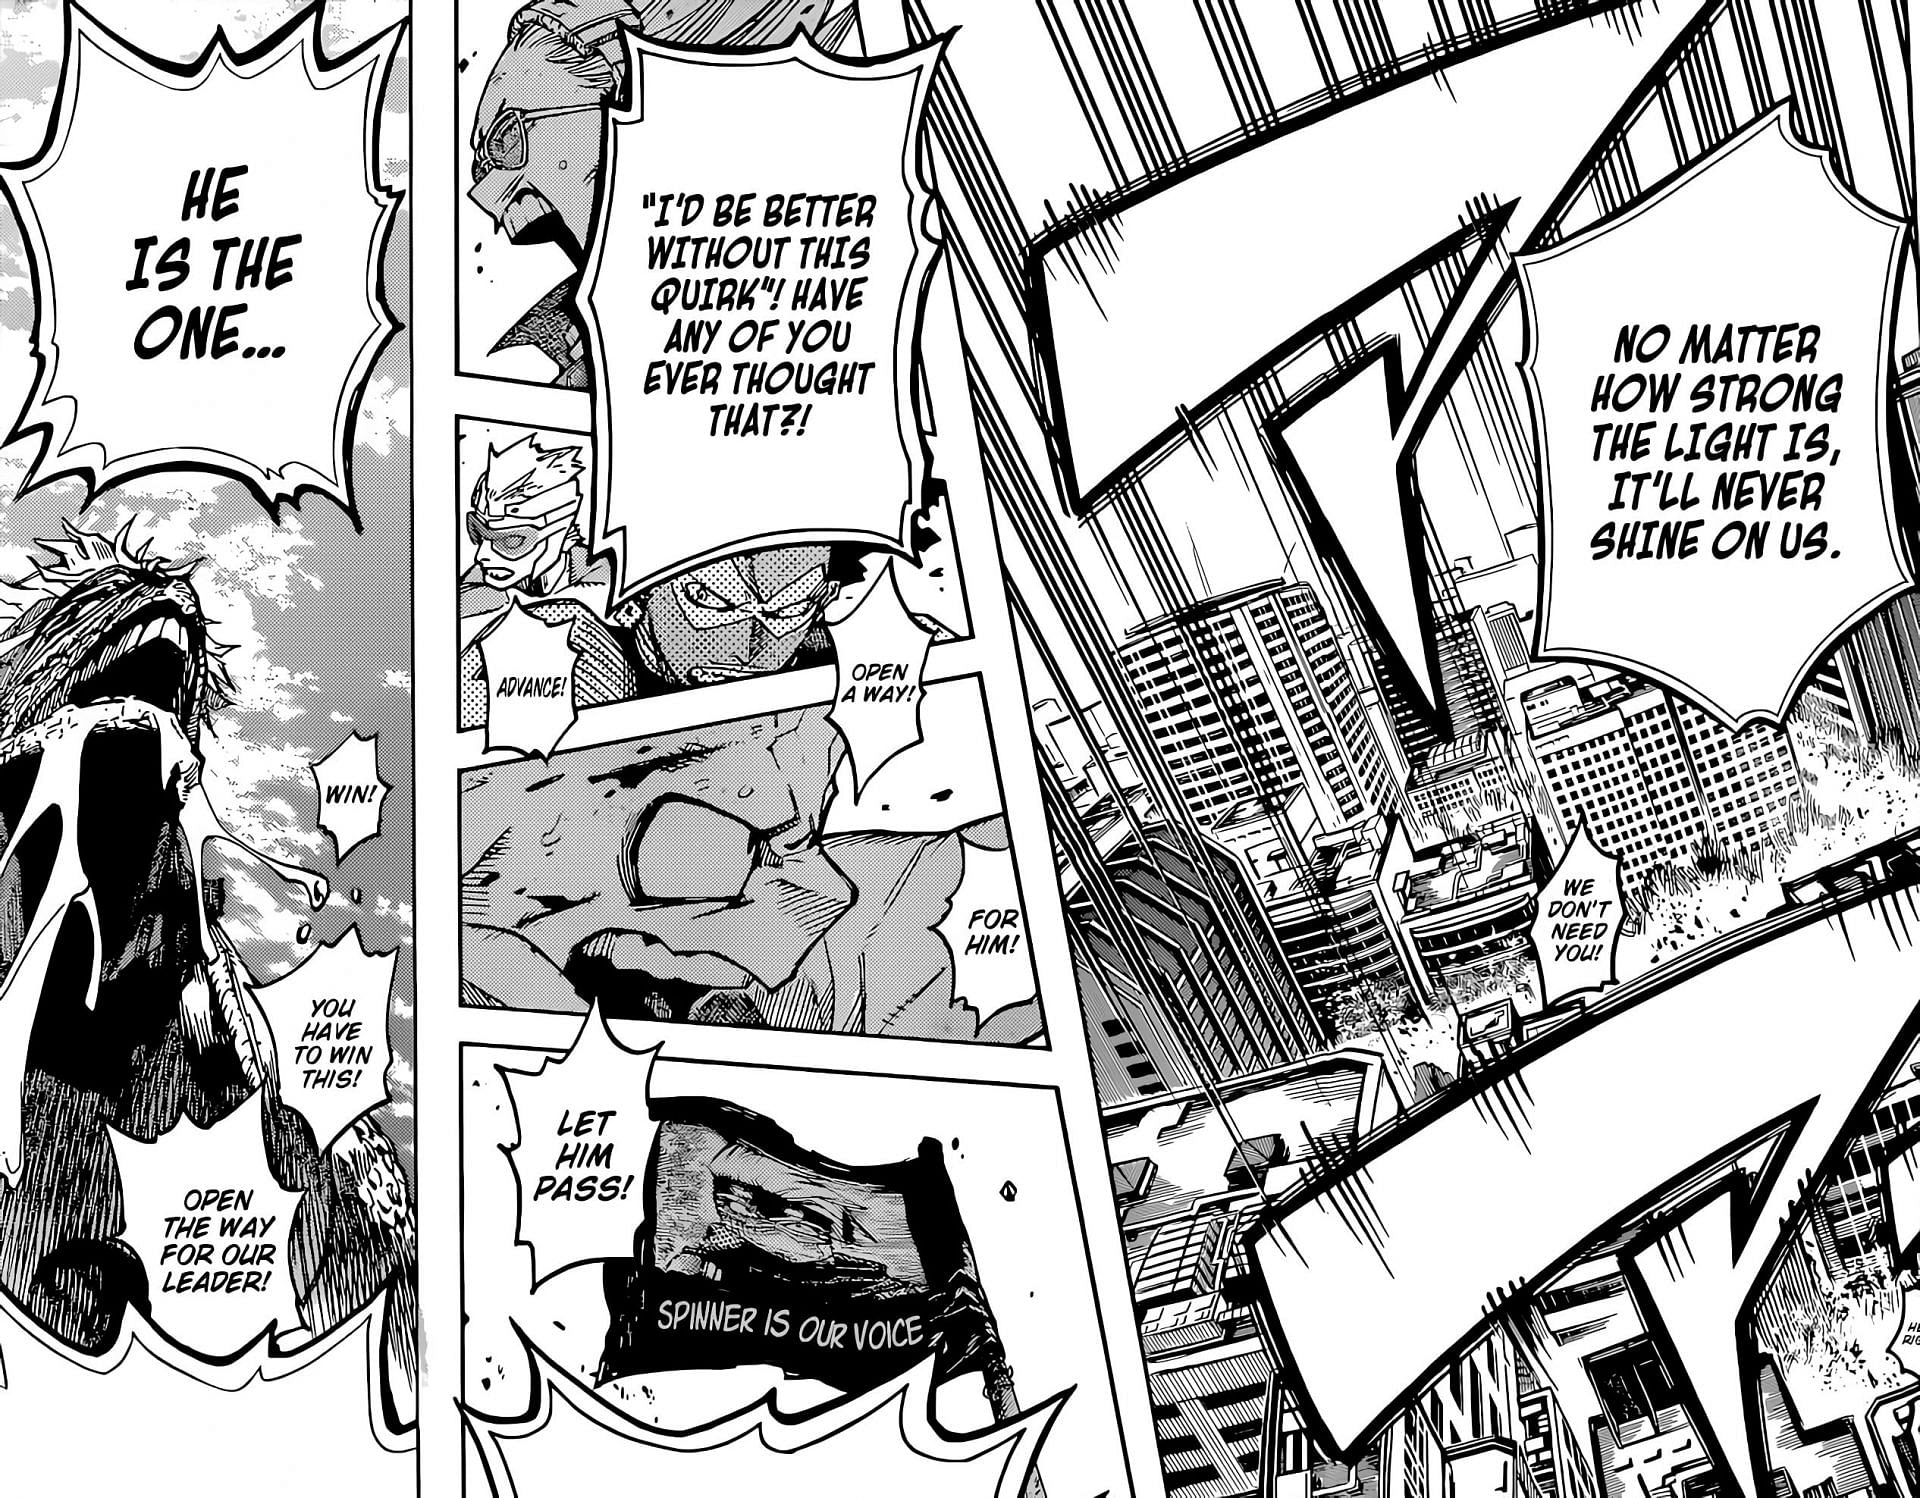 The mutants supporting Spinner in My Hero Academia chapter 370 (Image via Shueisha)